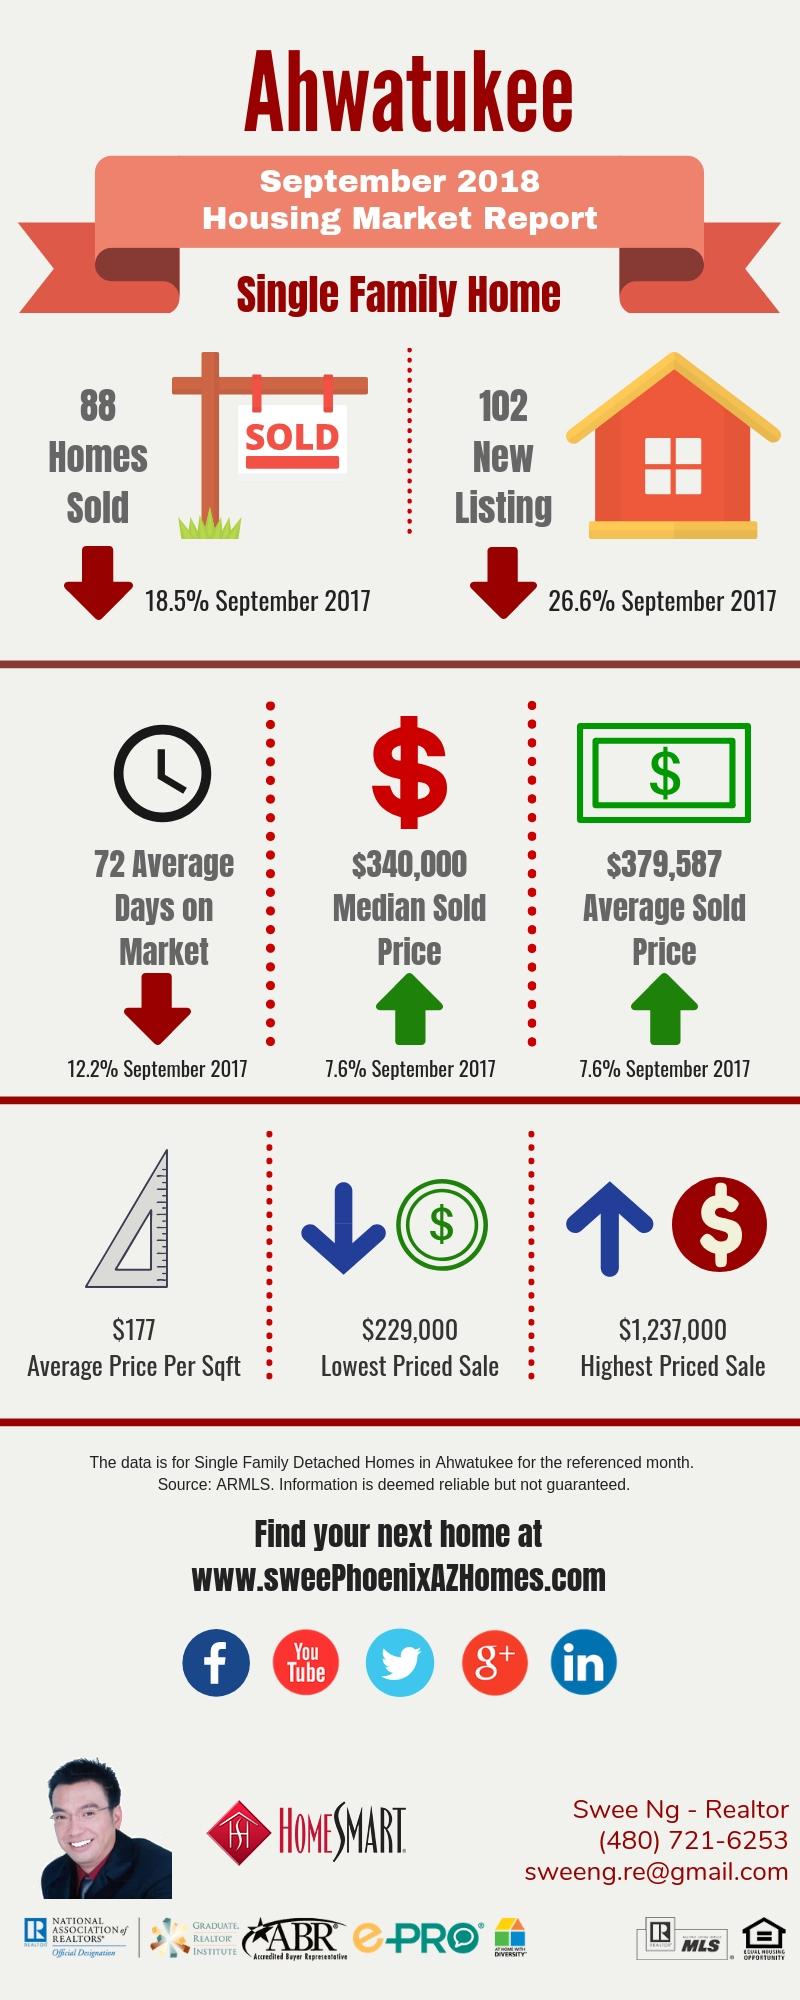 Ahwatukee Housing Market Trends Report September 2018, House Value, Real Estate and Statistic by Swee Ng